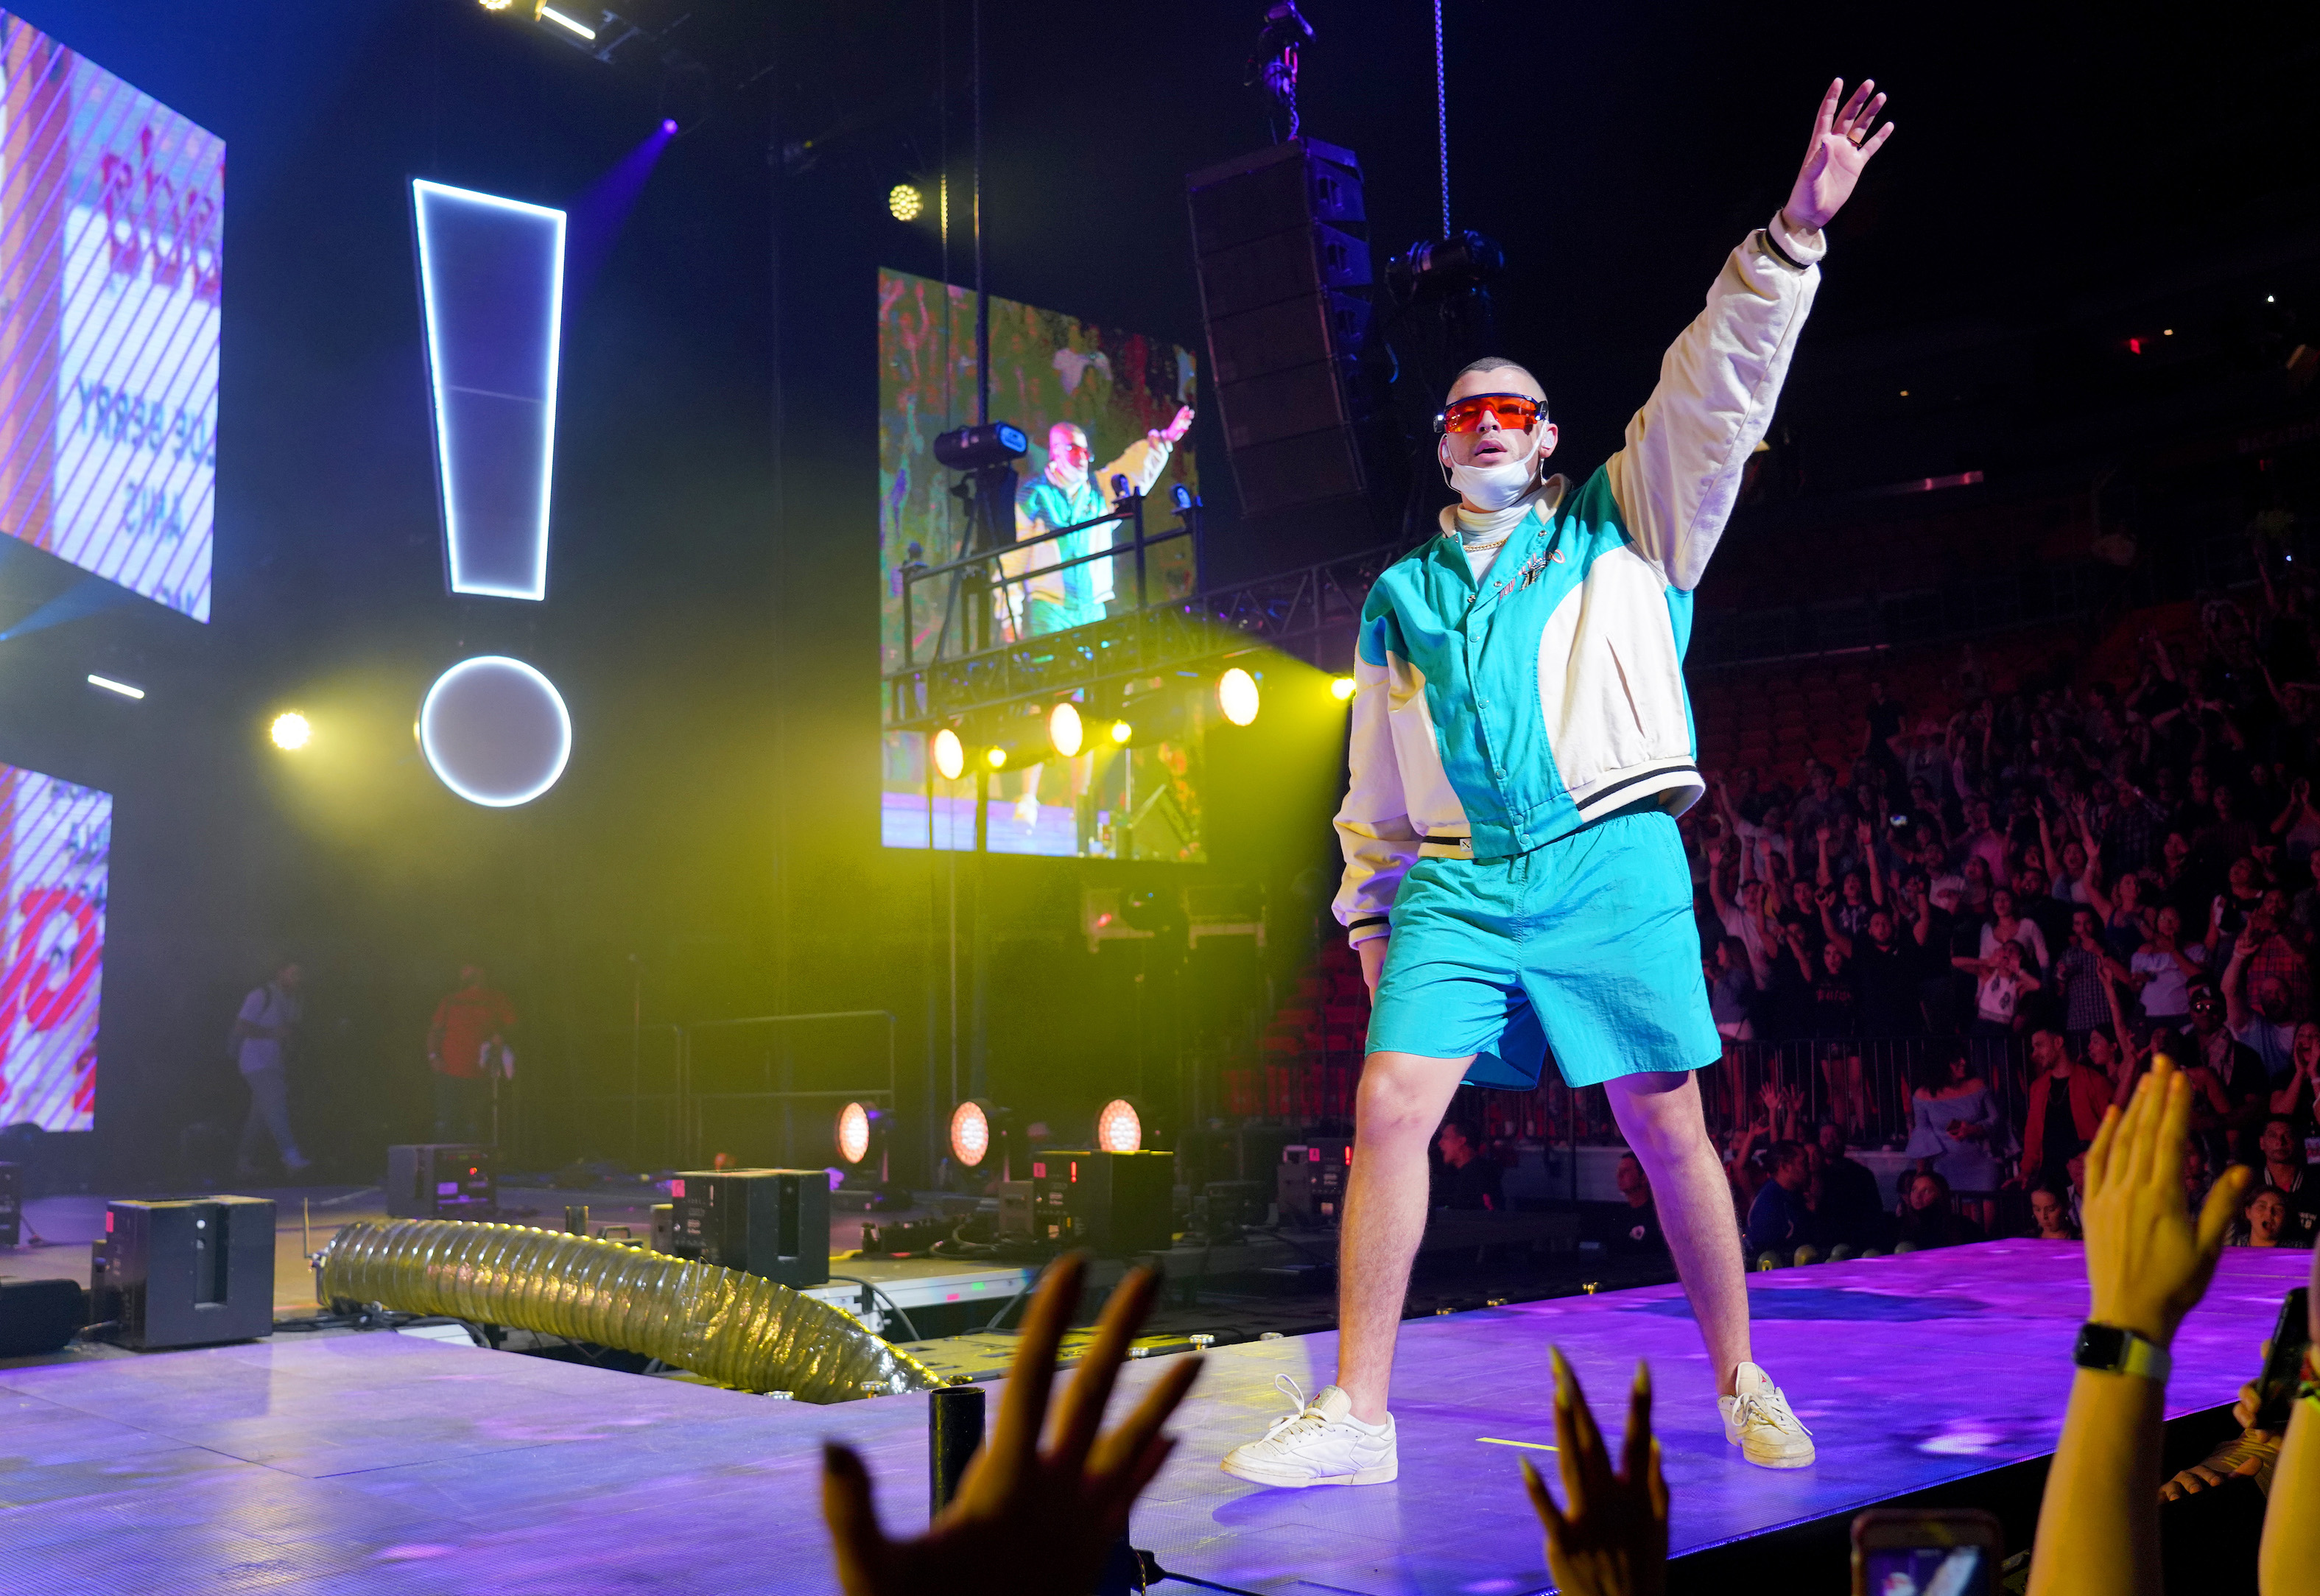 Bad Bunny Is Set To Perform a 'Historic' Livestream Concert